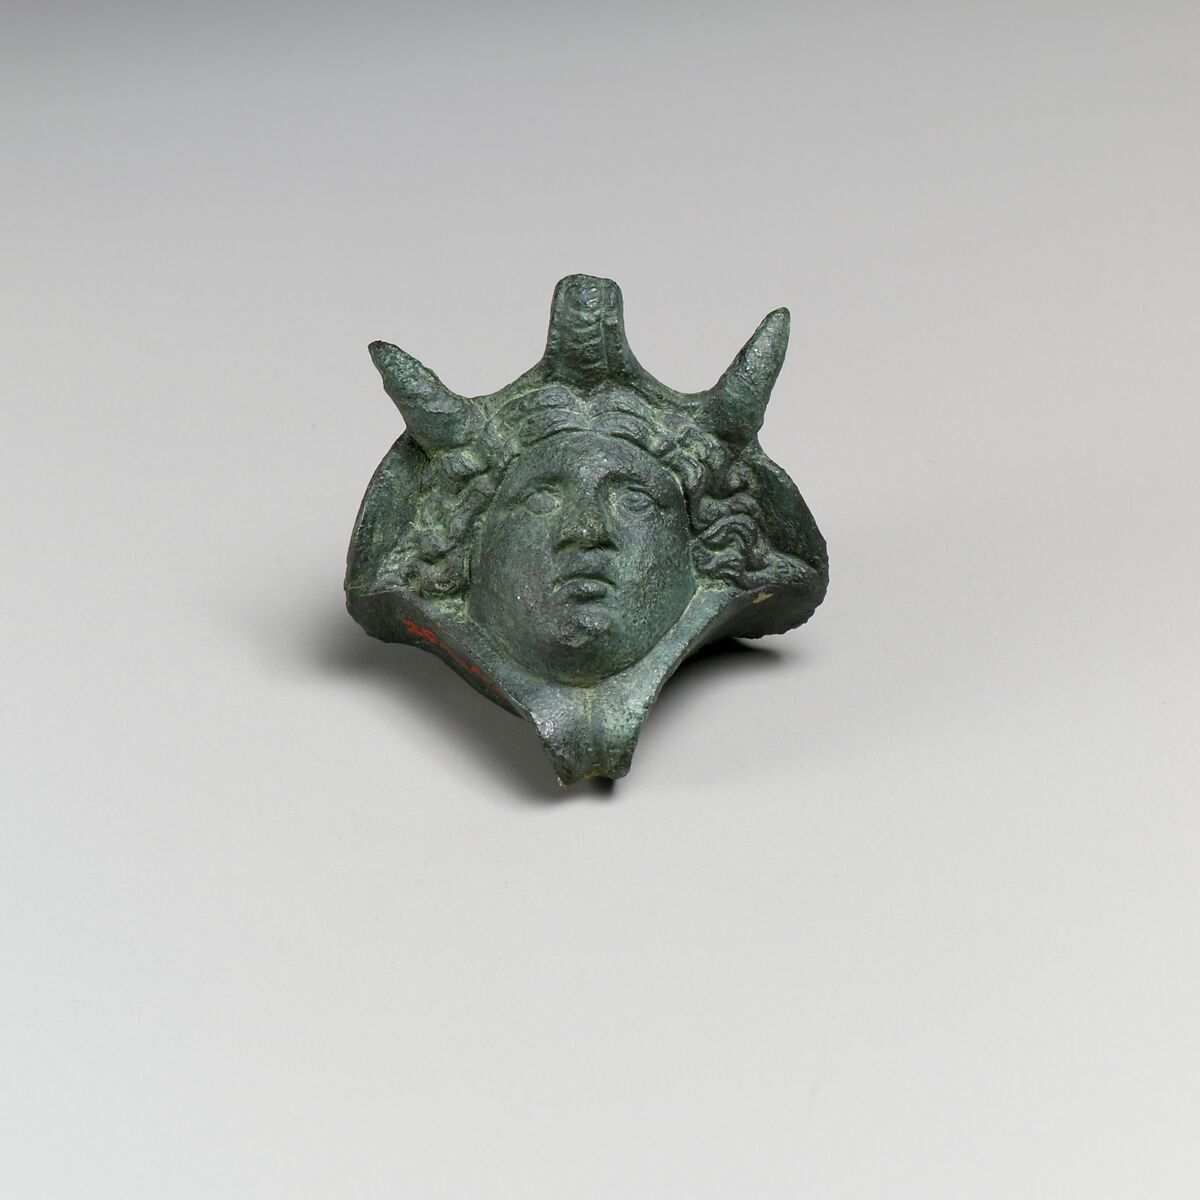 Decorative attachment in the form of a head wearing an elephant headdress, Bronze 